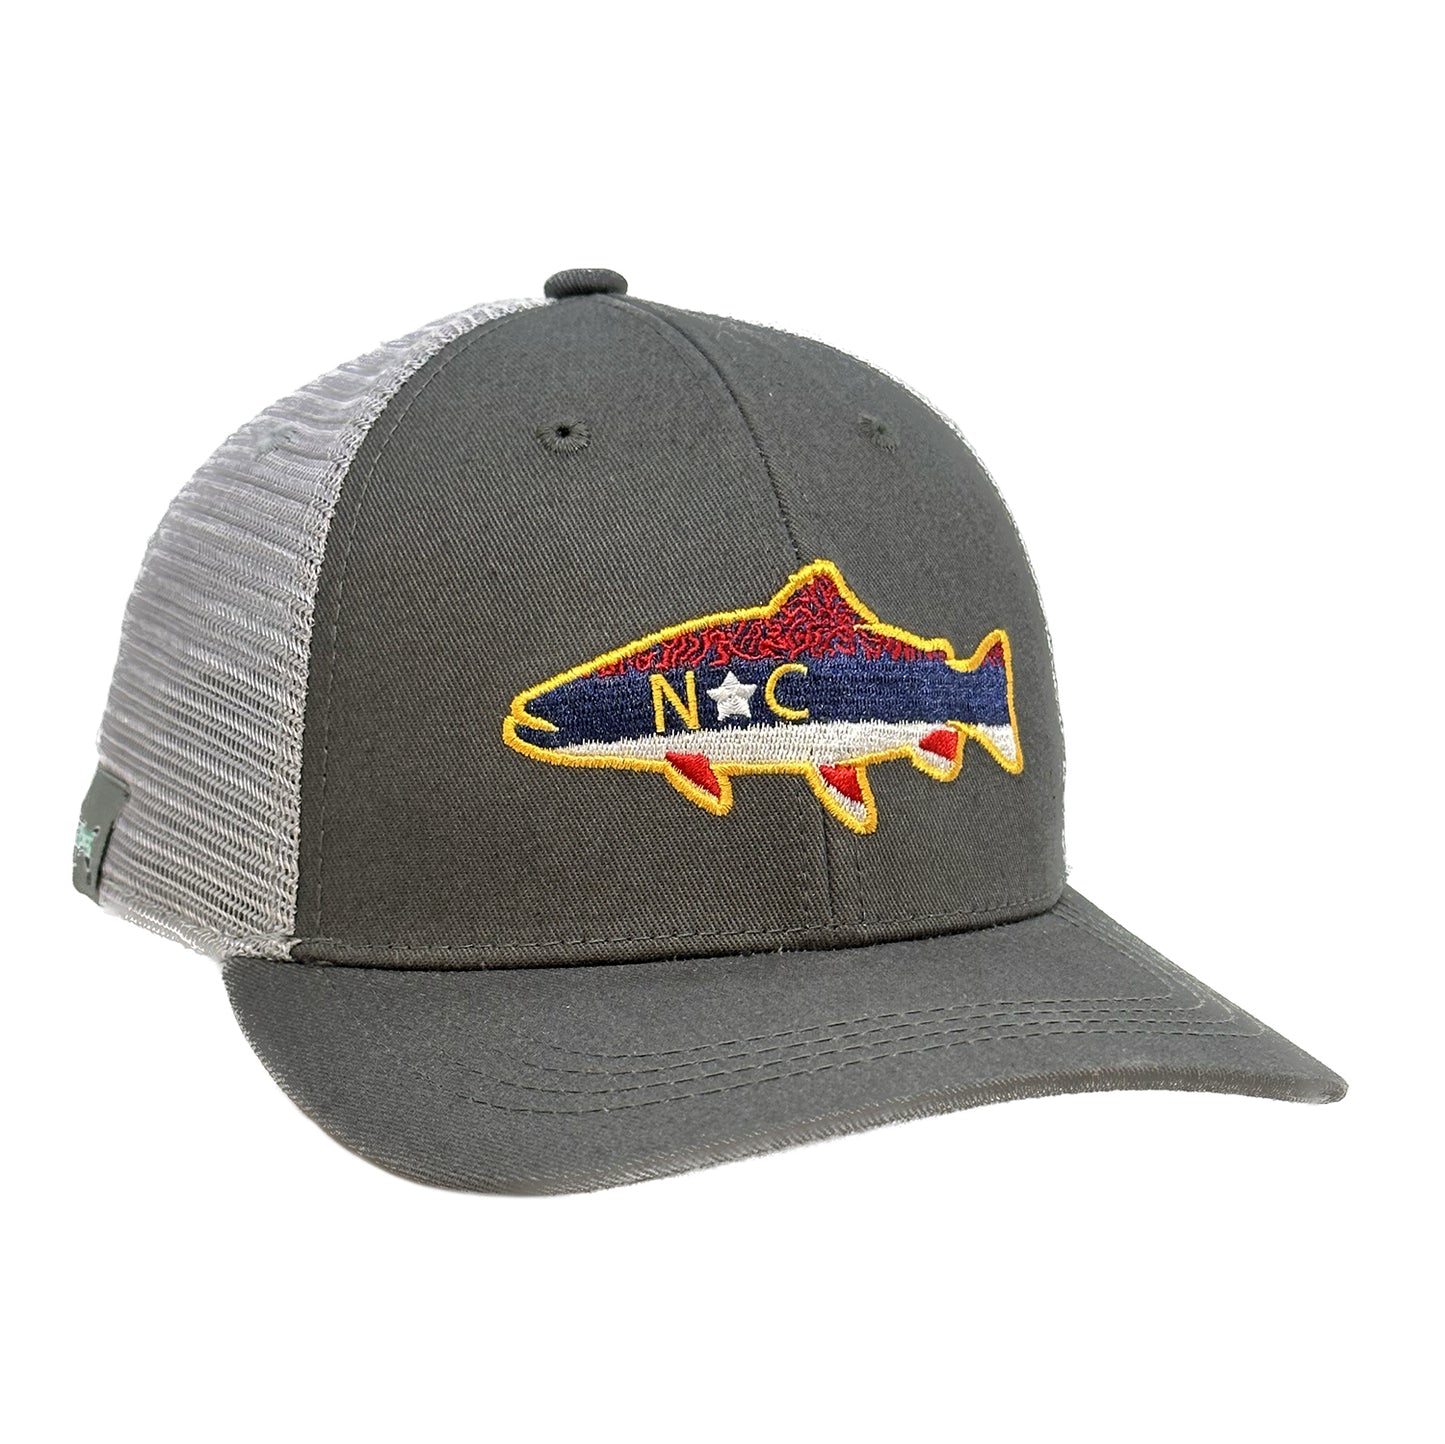 A dary gray front light gray mesh back hat with a trout hspaed patch of the north carolina flag, with brook trout vermiculation at the top of the design to mimic a brook trout